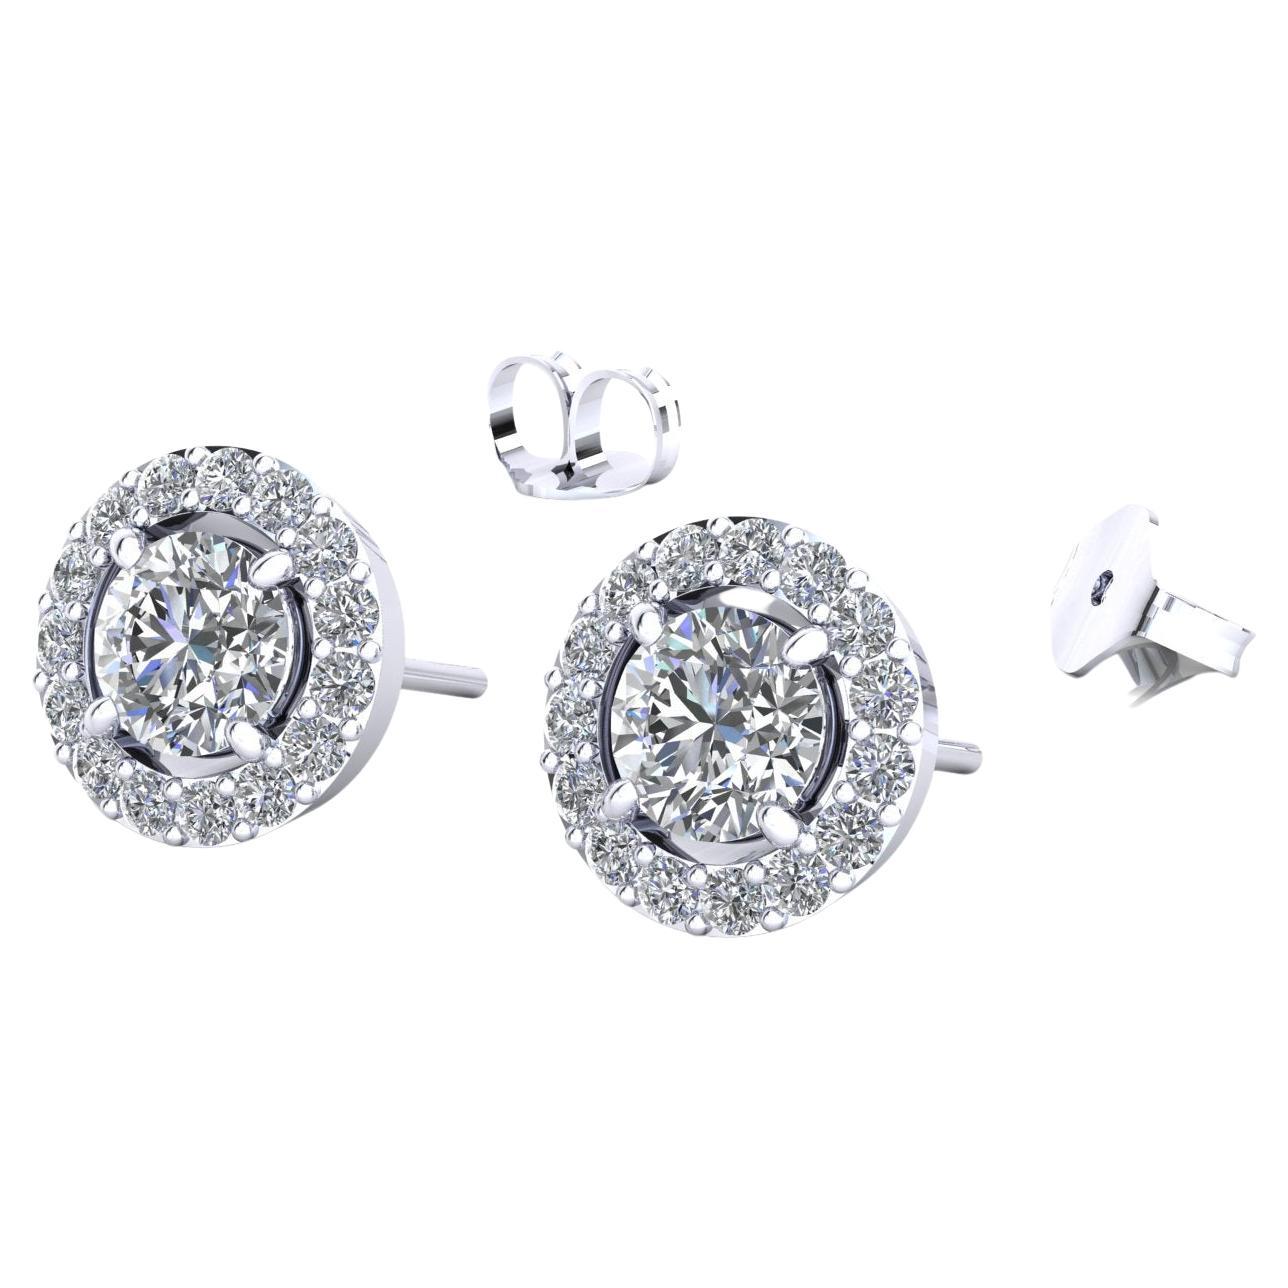 Special Earrings "Circle" with Certificate Natural Diamonds, 18kt Gold